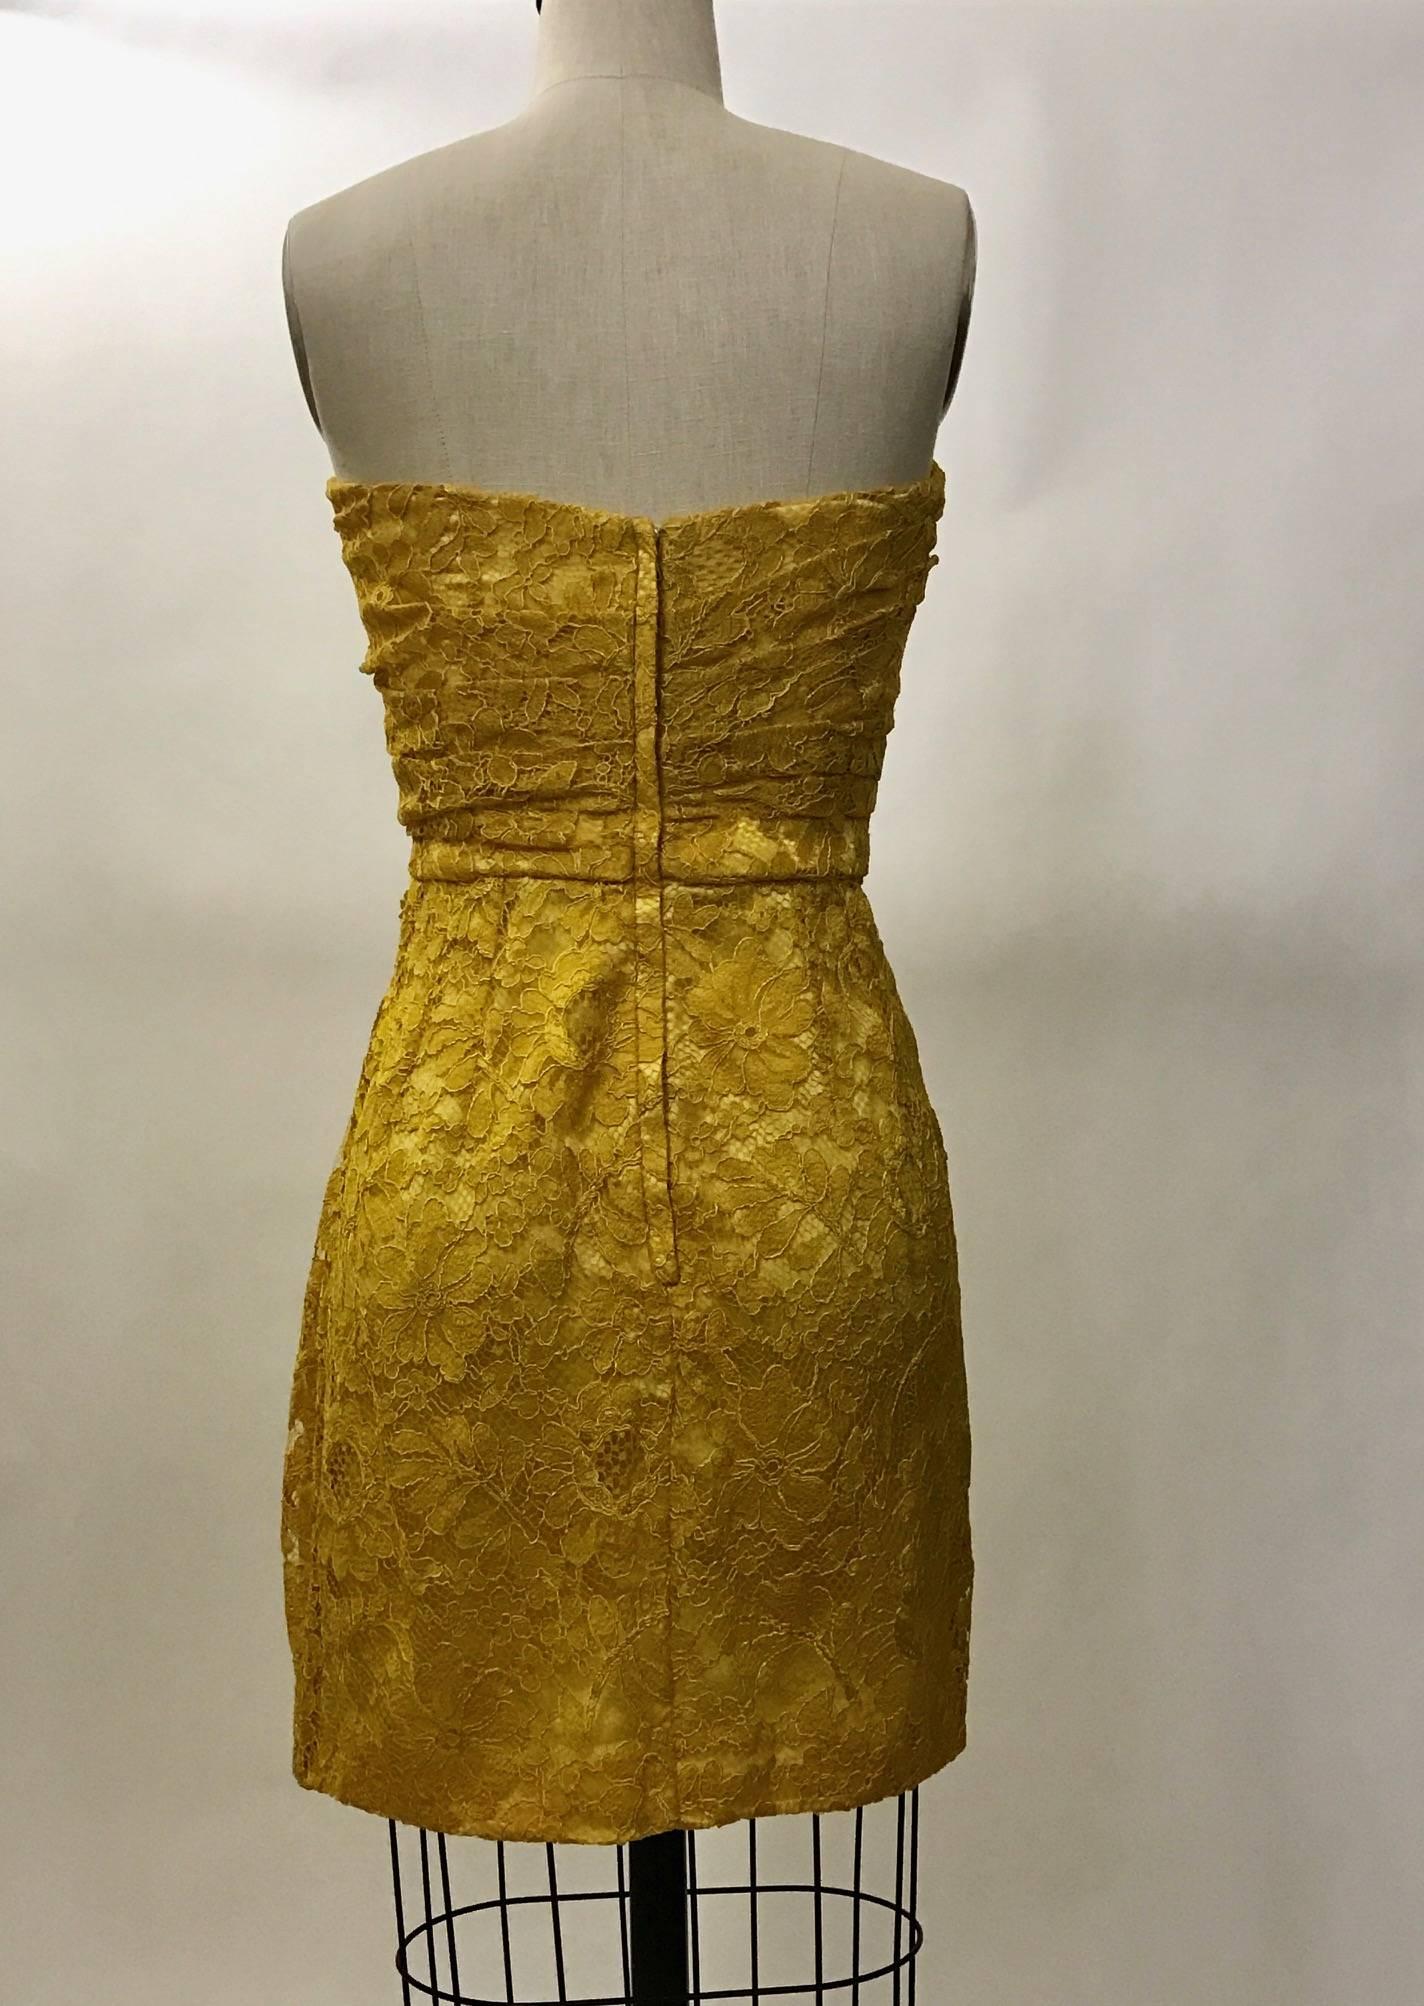 Dolce & Gabbana floral lace strapless dress in a rich marigold yellow tone.  Slight ruching at right waist creates a curvy silhouette. Boning and cups built into bodice. Back zip. 

Lace: 75% viscose, 25% polyamide.
Fully lined in 97% silk, 3%